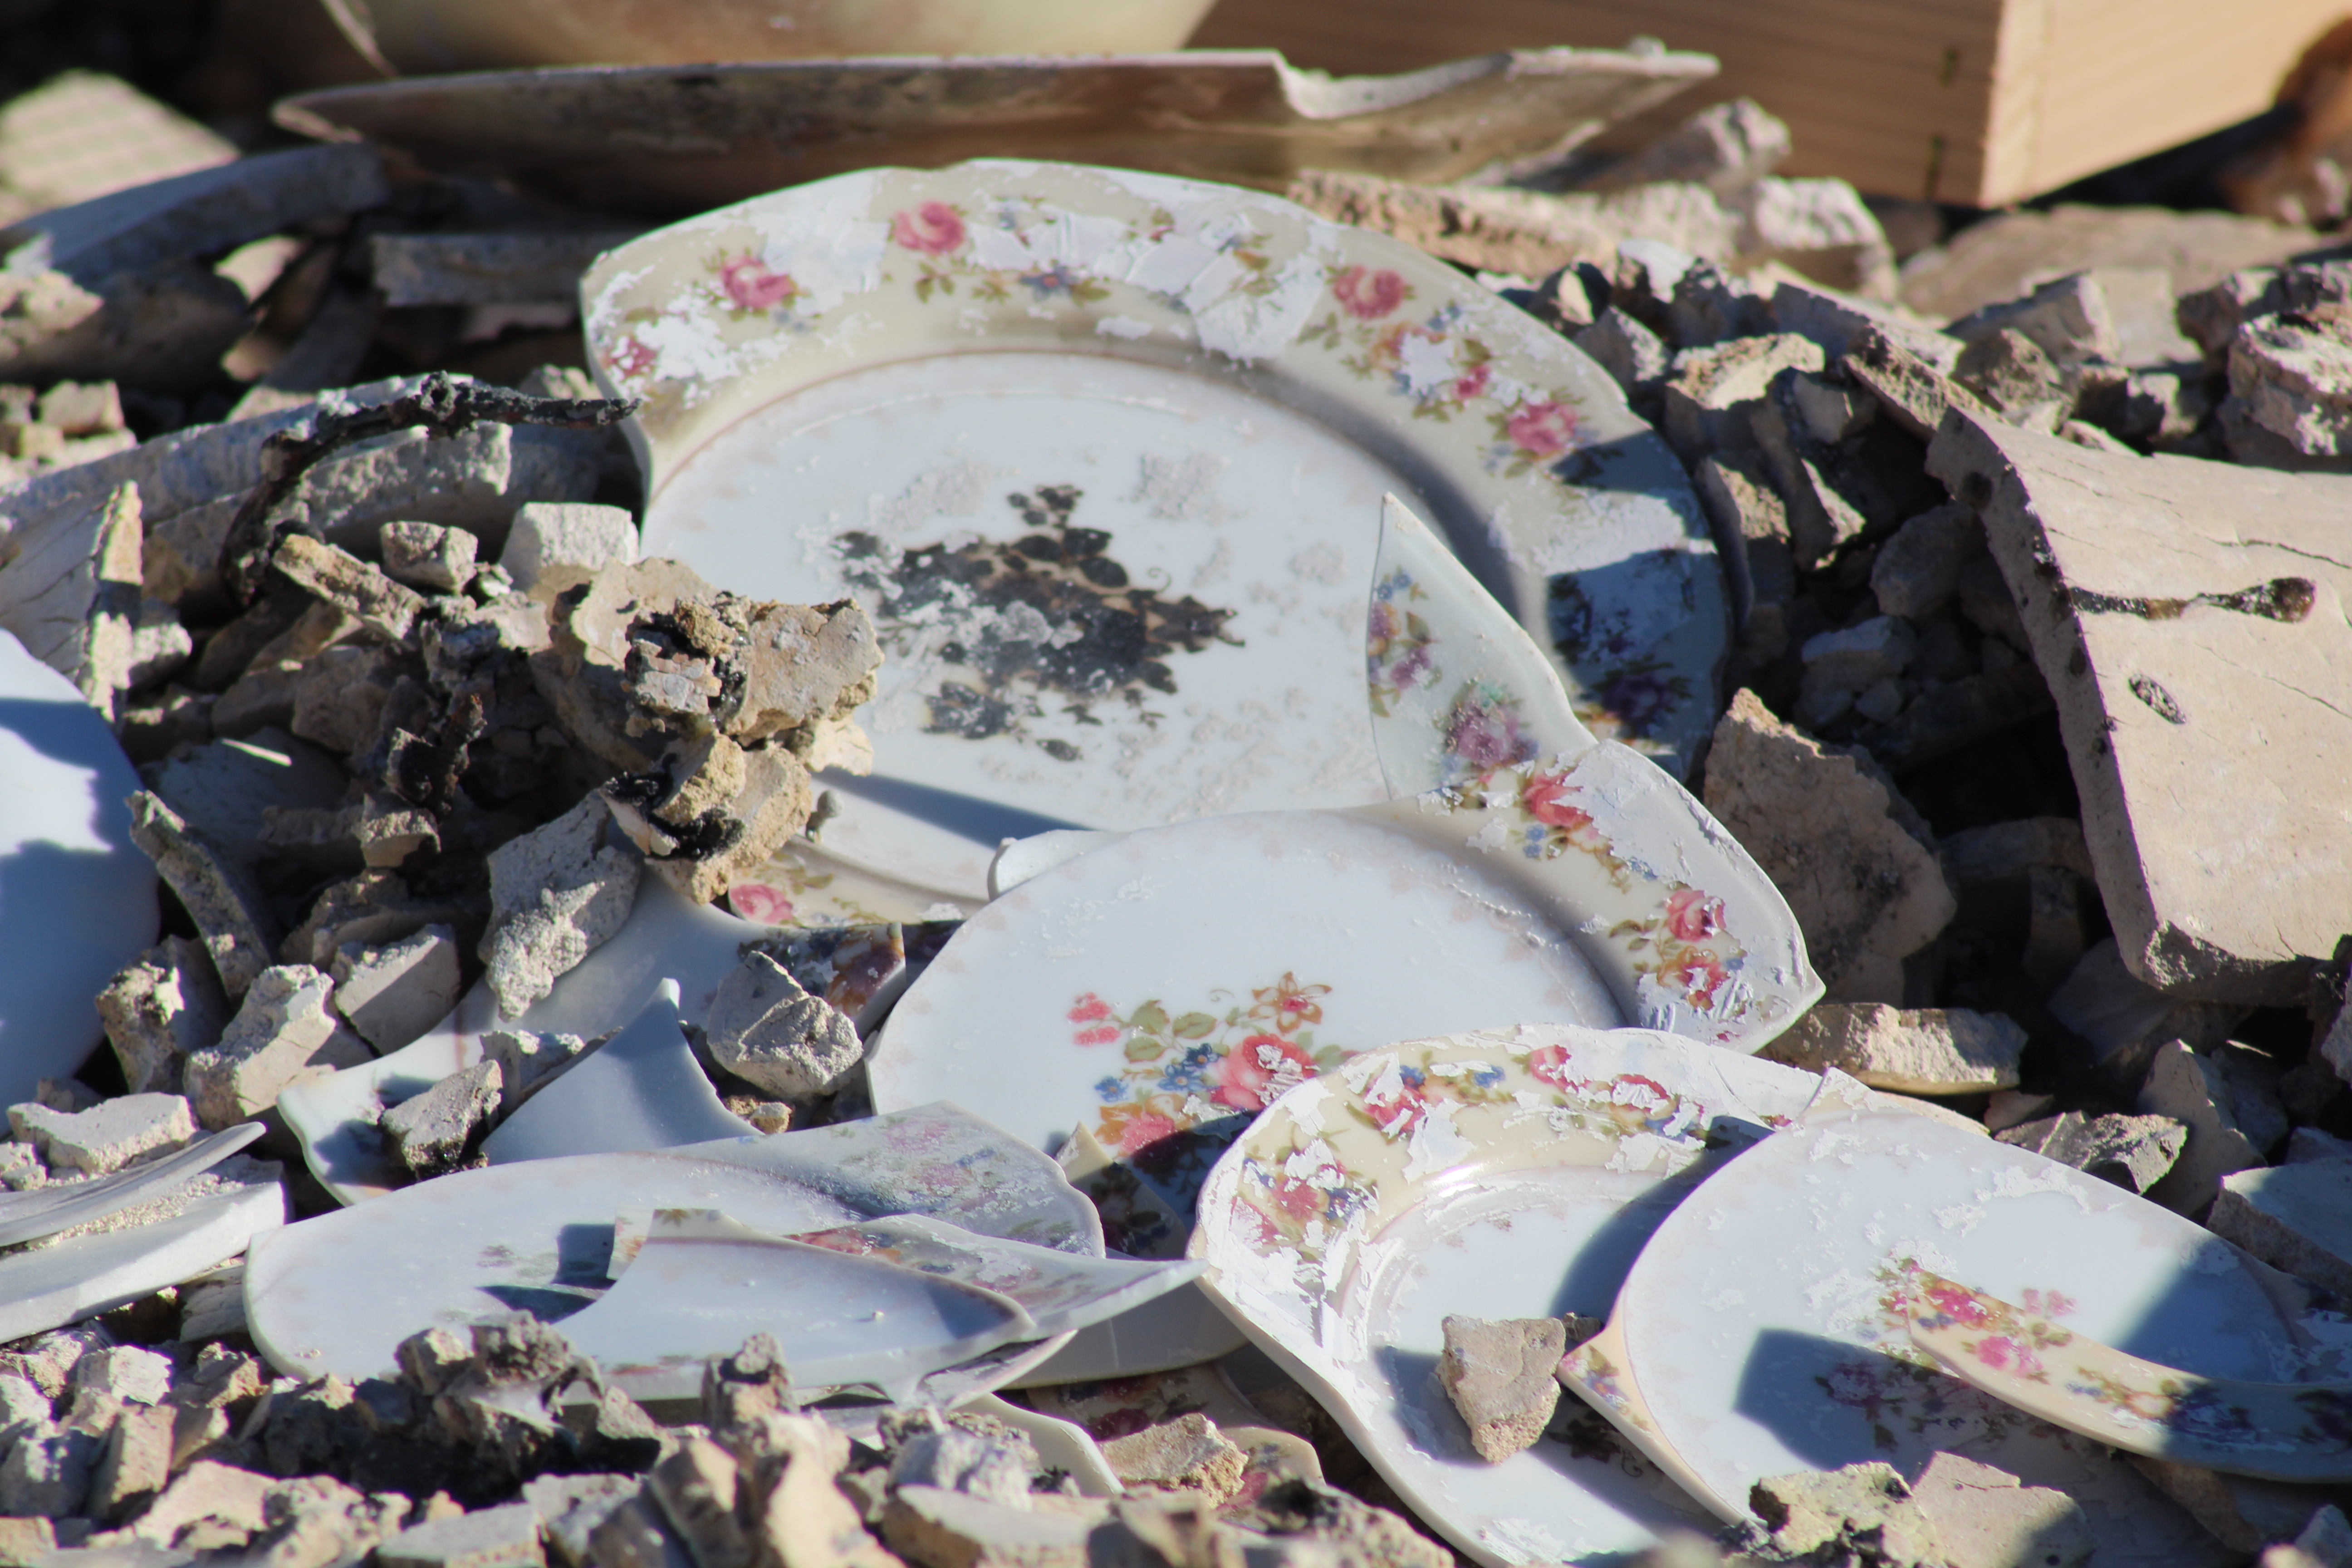 Family china fragments amid ruins of home of teachers Doug and Cati Day.